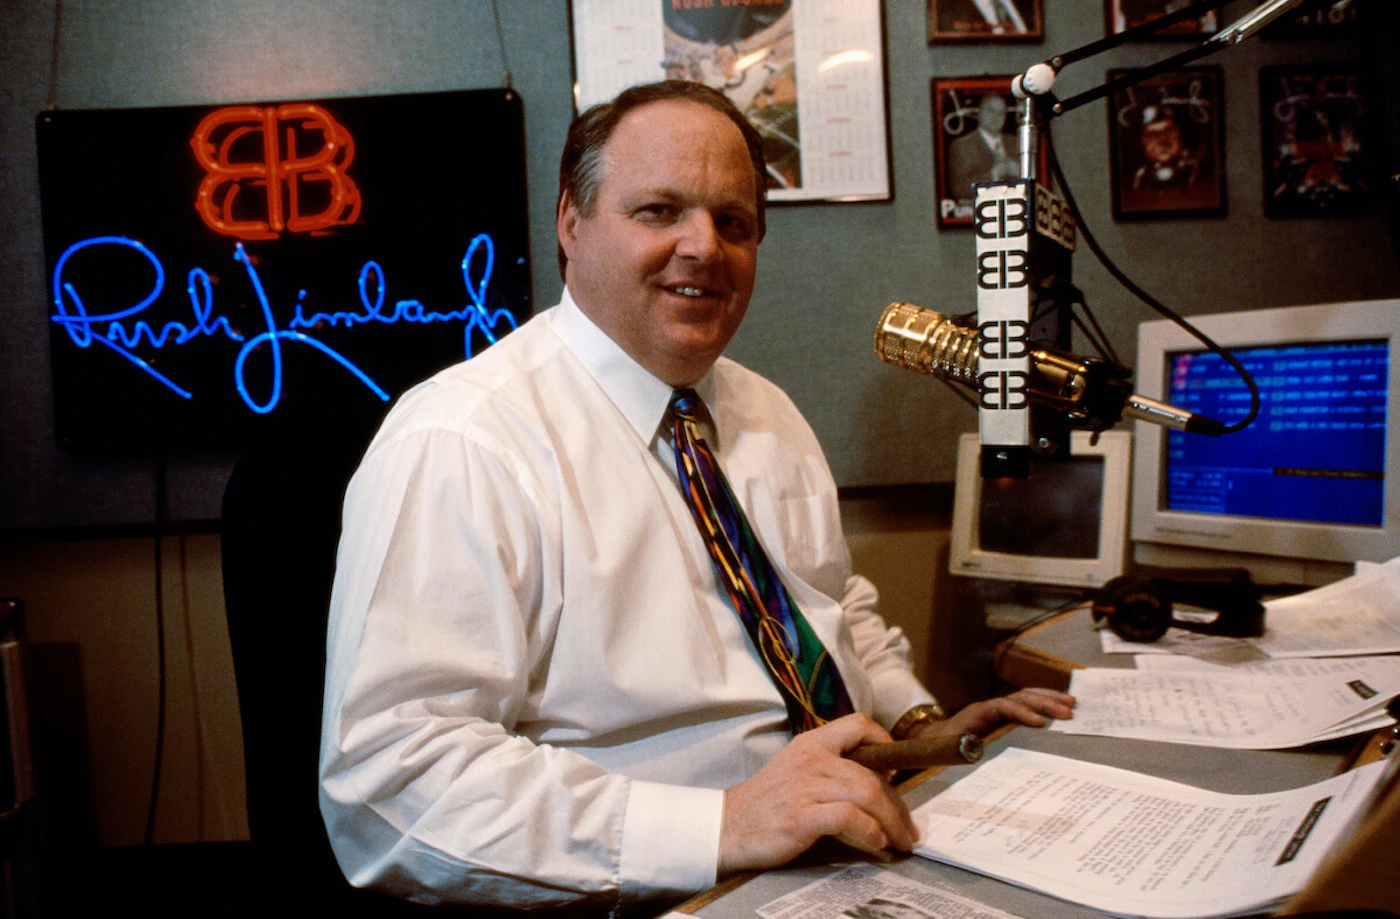 Rush Limbaugh in his studio during his radio show (Photo by mark peterson/Corbis via Getty Images)